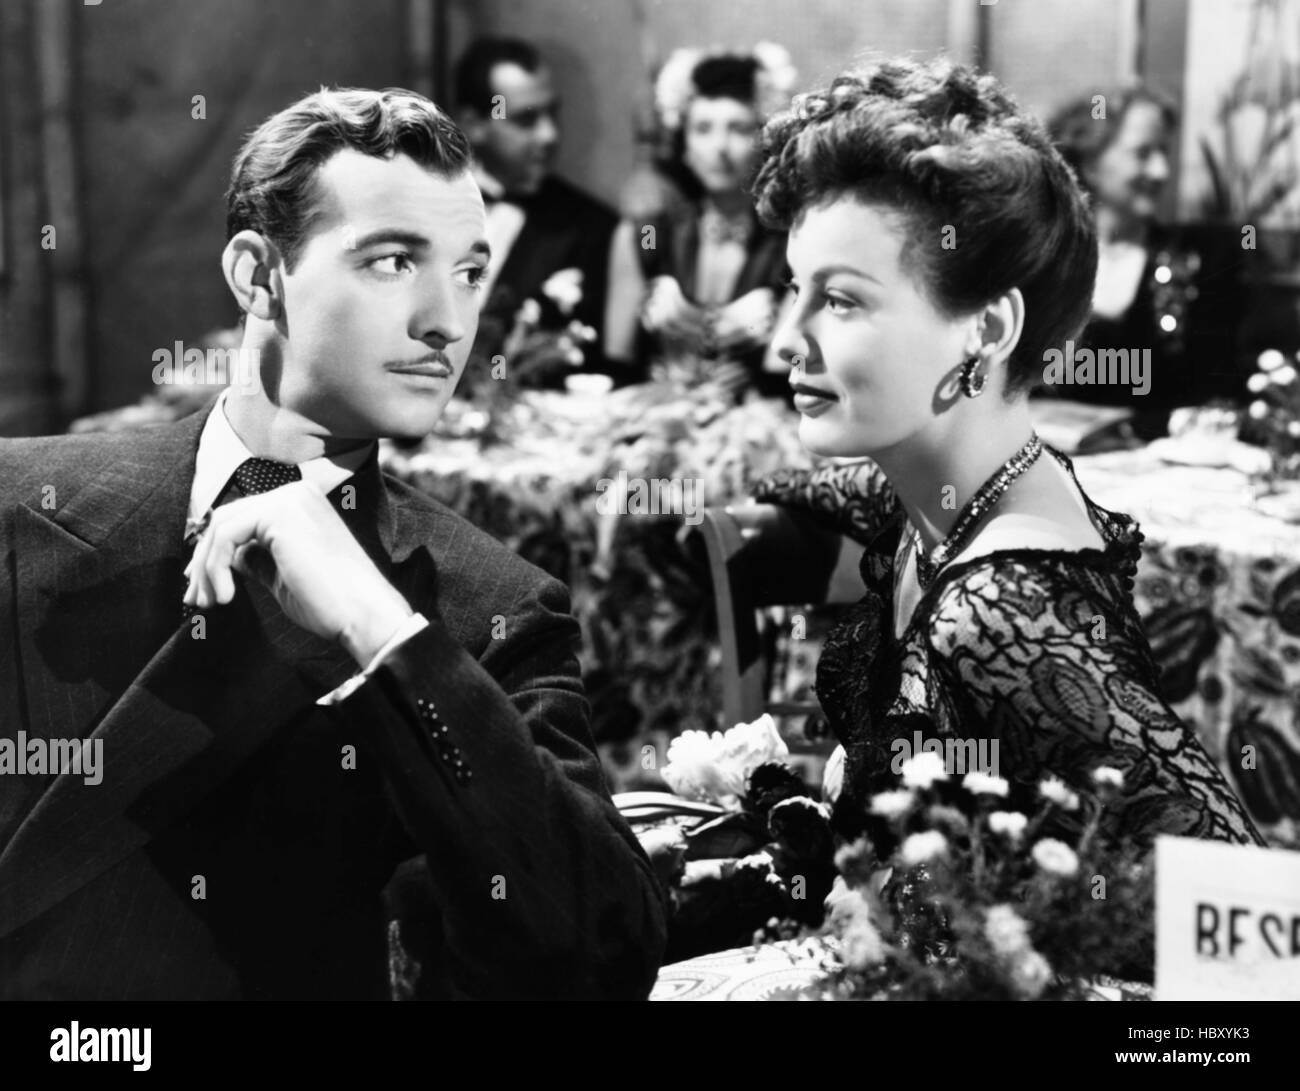 HER KIND OF MAN, from left: Zachary, Faye Emerson, 1946 Stock Photo - Alamy